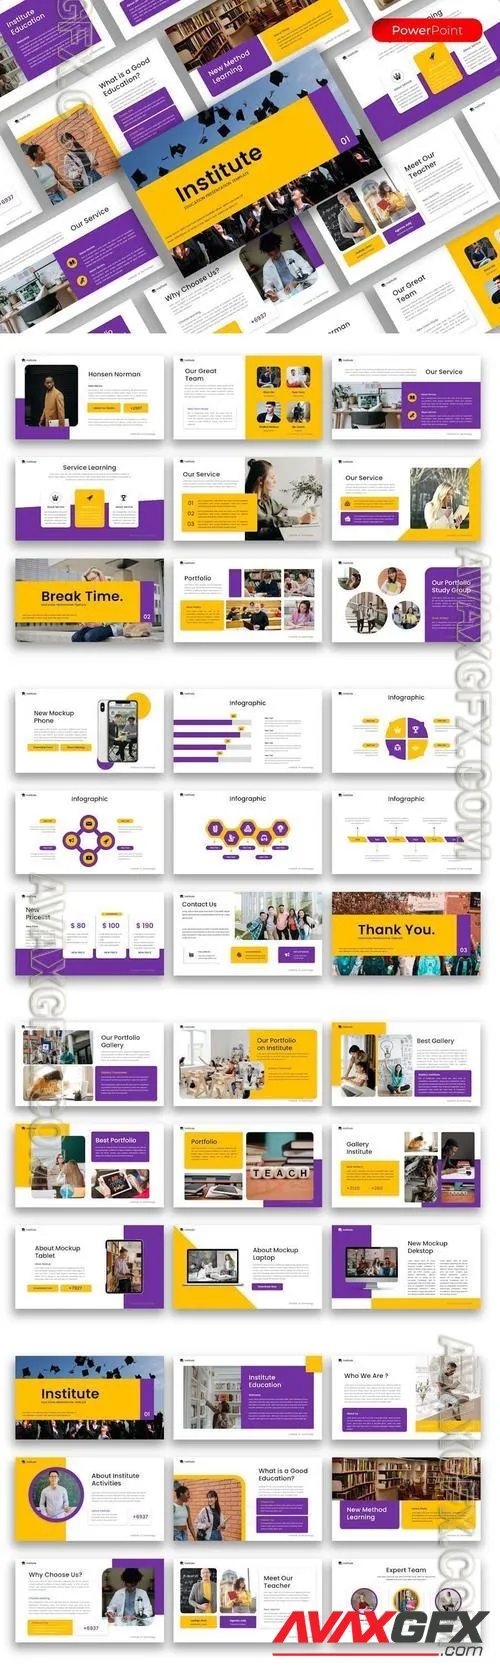 Institute - Education PowerPoint Template